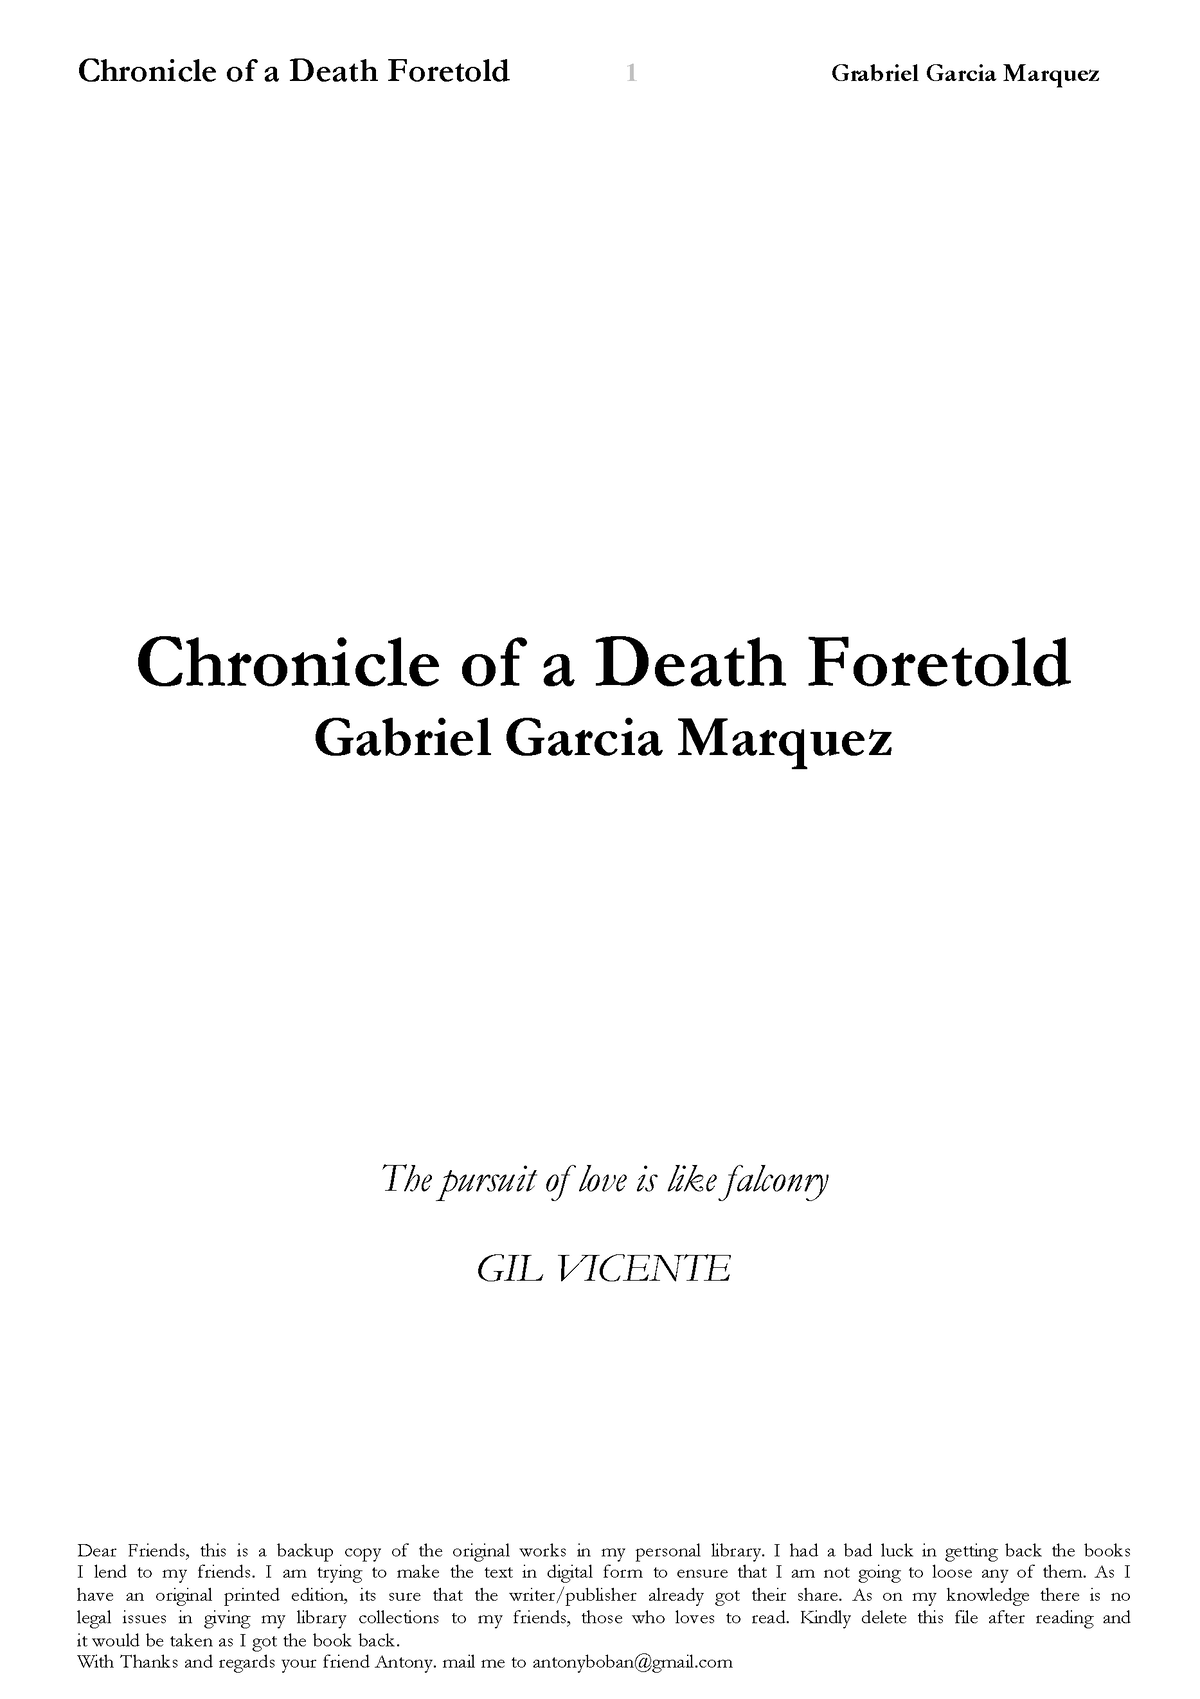 hl essay chronicle of a death foretold